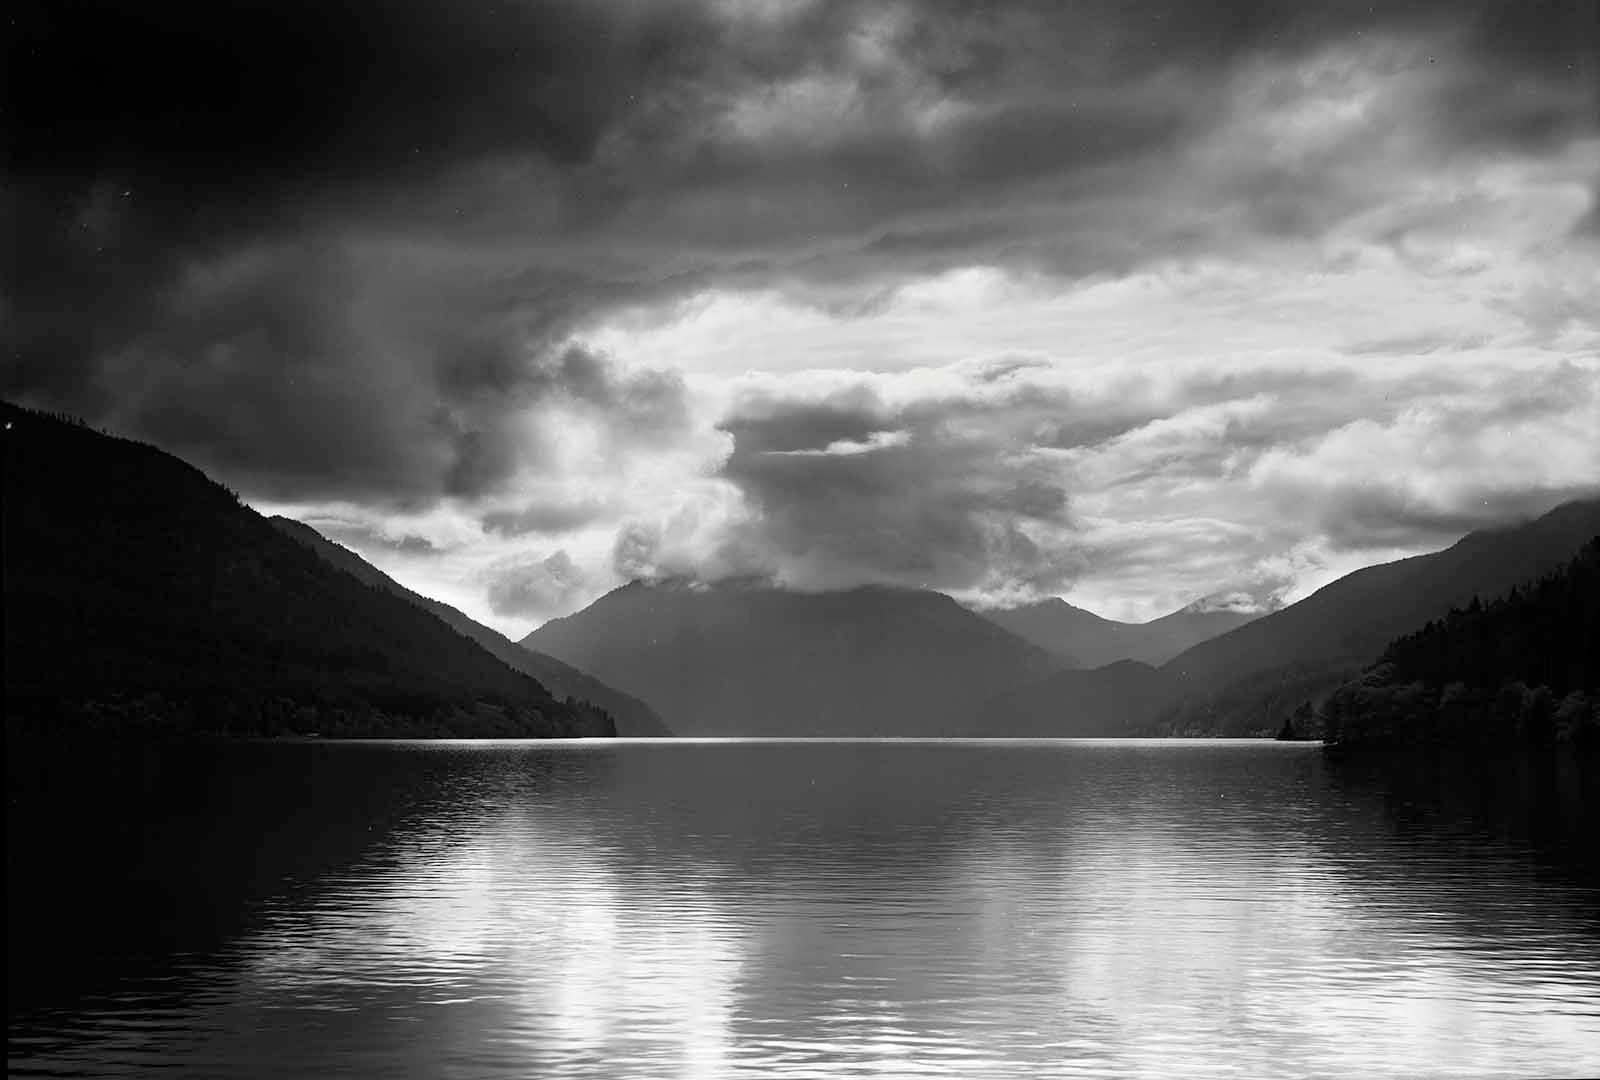 Clyde Butcher Black and White Photograph - Lake Crescent.